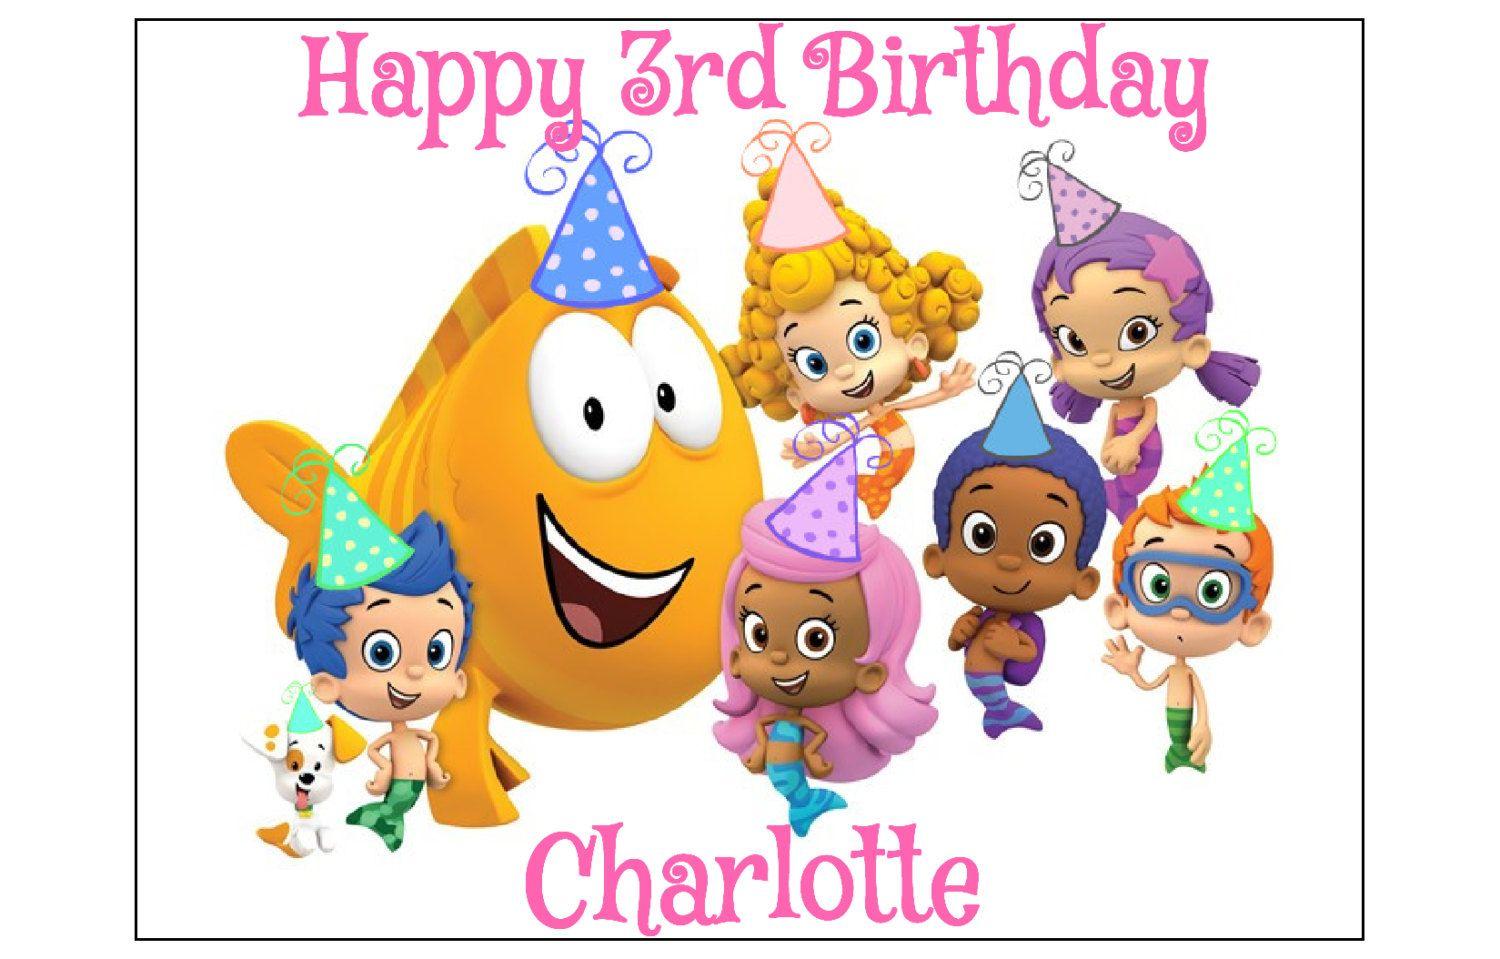 Bubble Guppies EDIBLE cake topper decoration party birthday